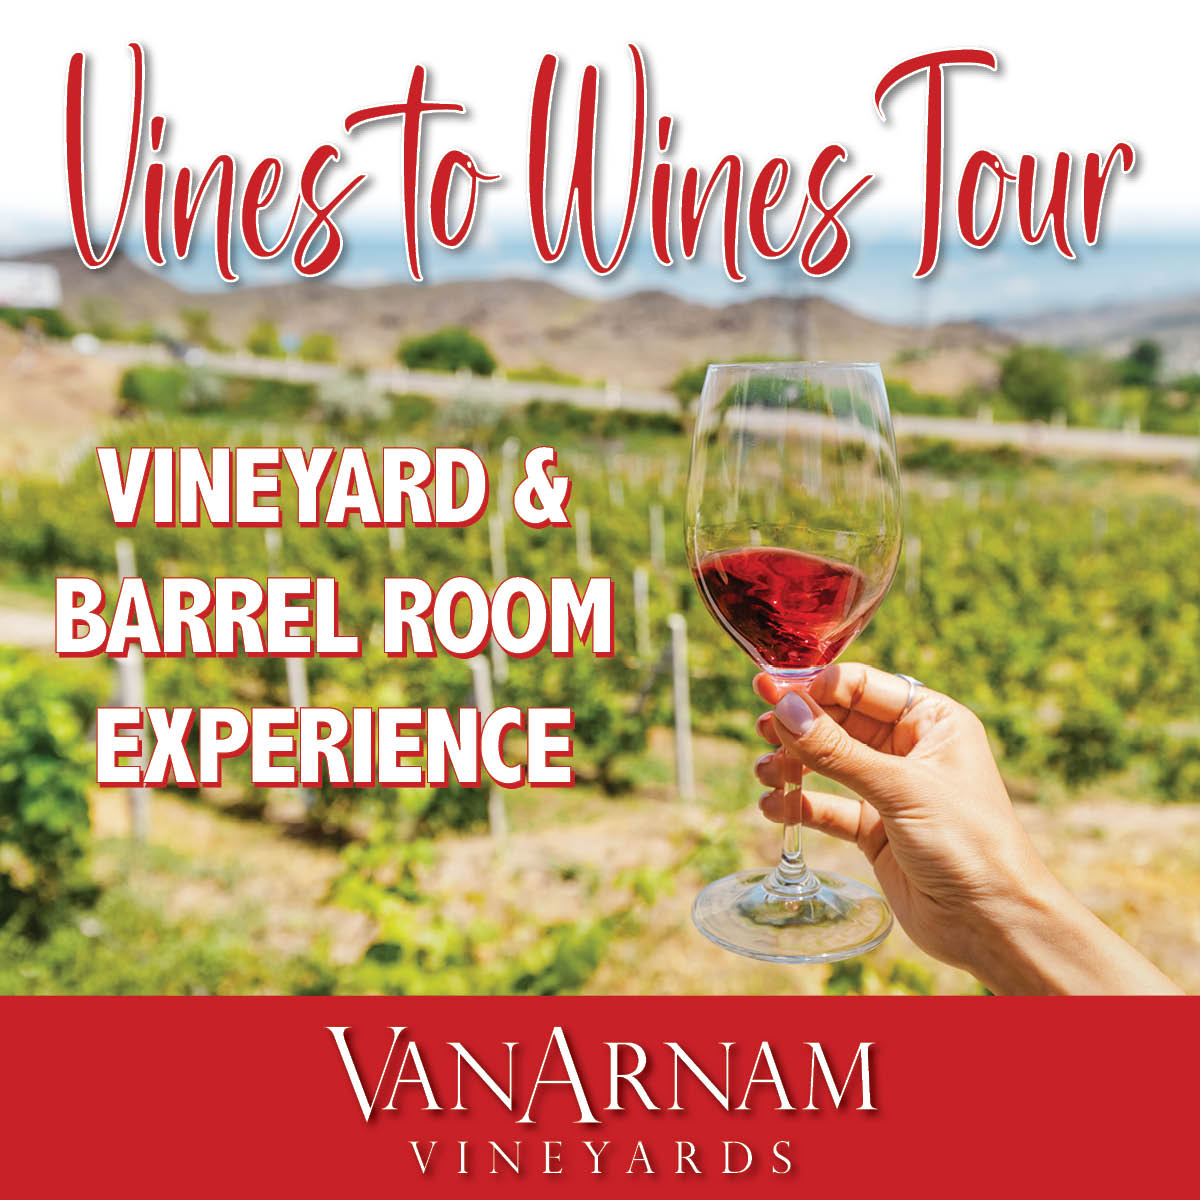 Product Image for Vines to Wines Tour - Sat. June 18th 1:00 PM